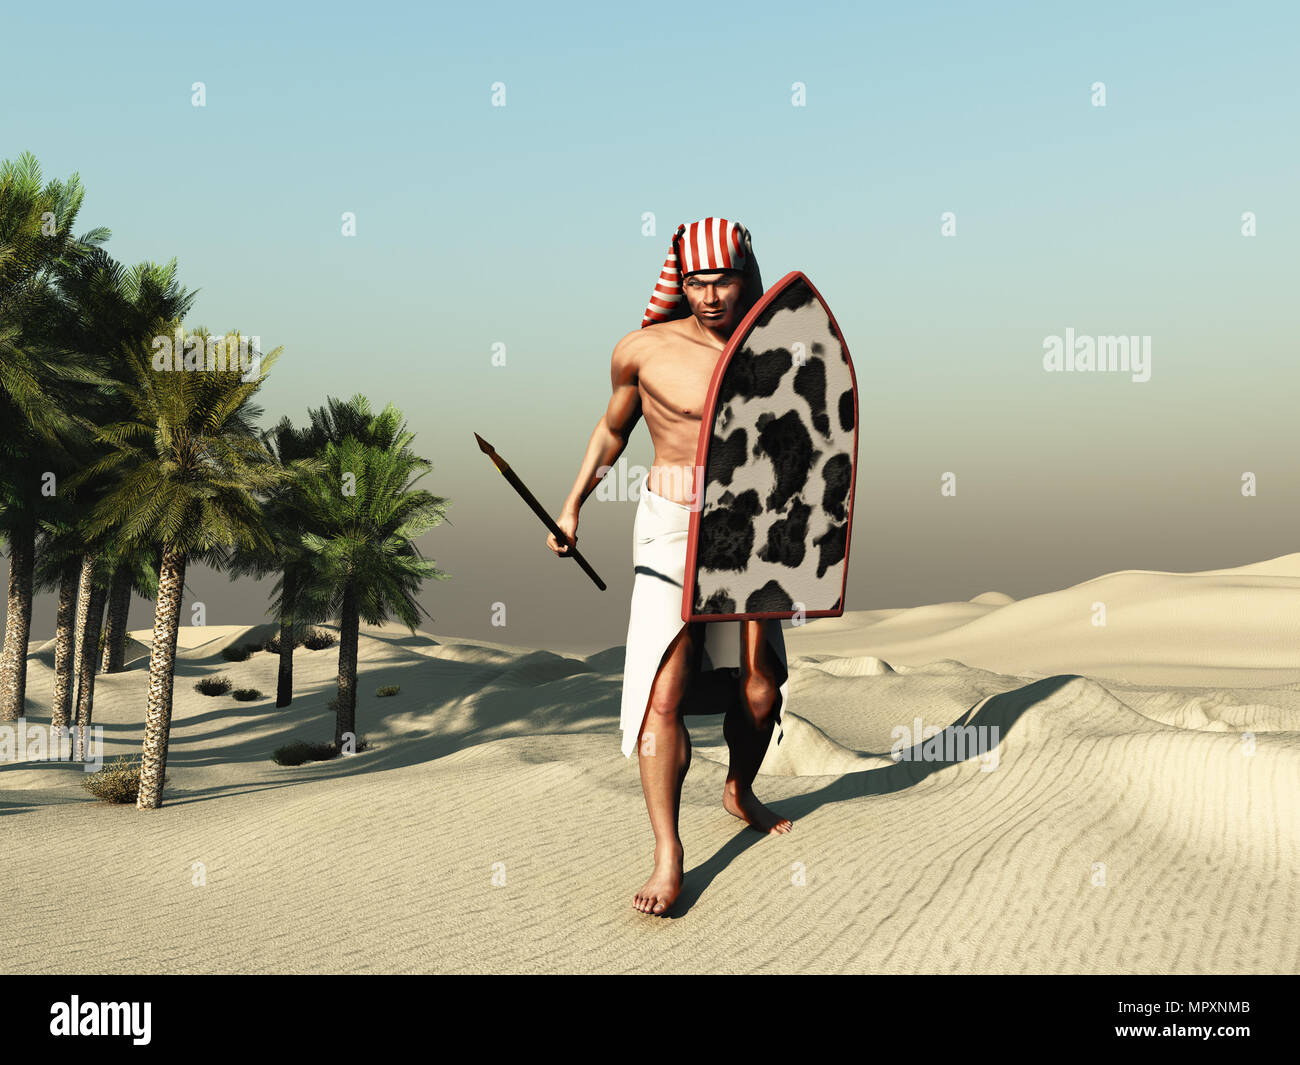 Soldier of ancient Egypt Stock Photo